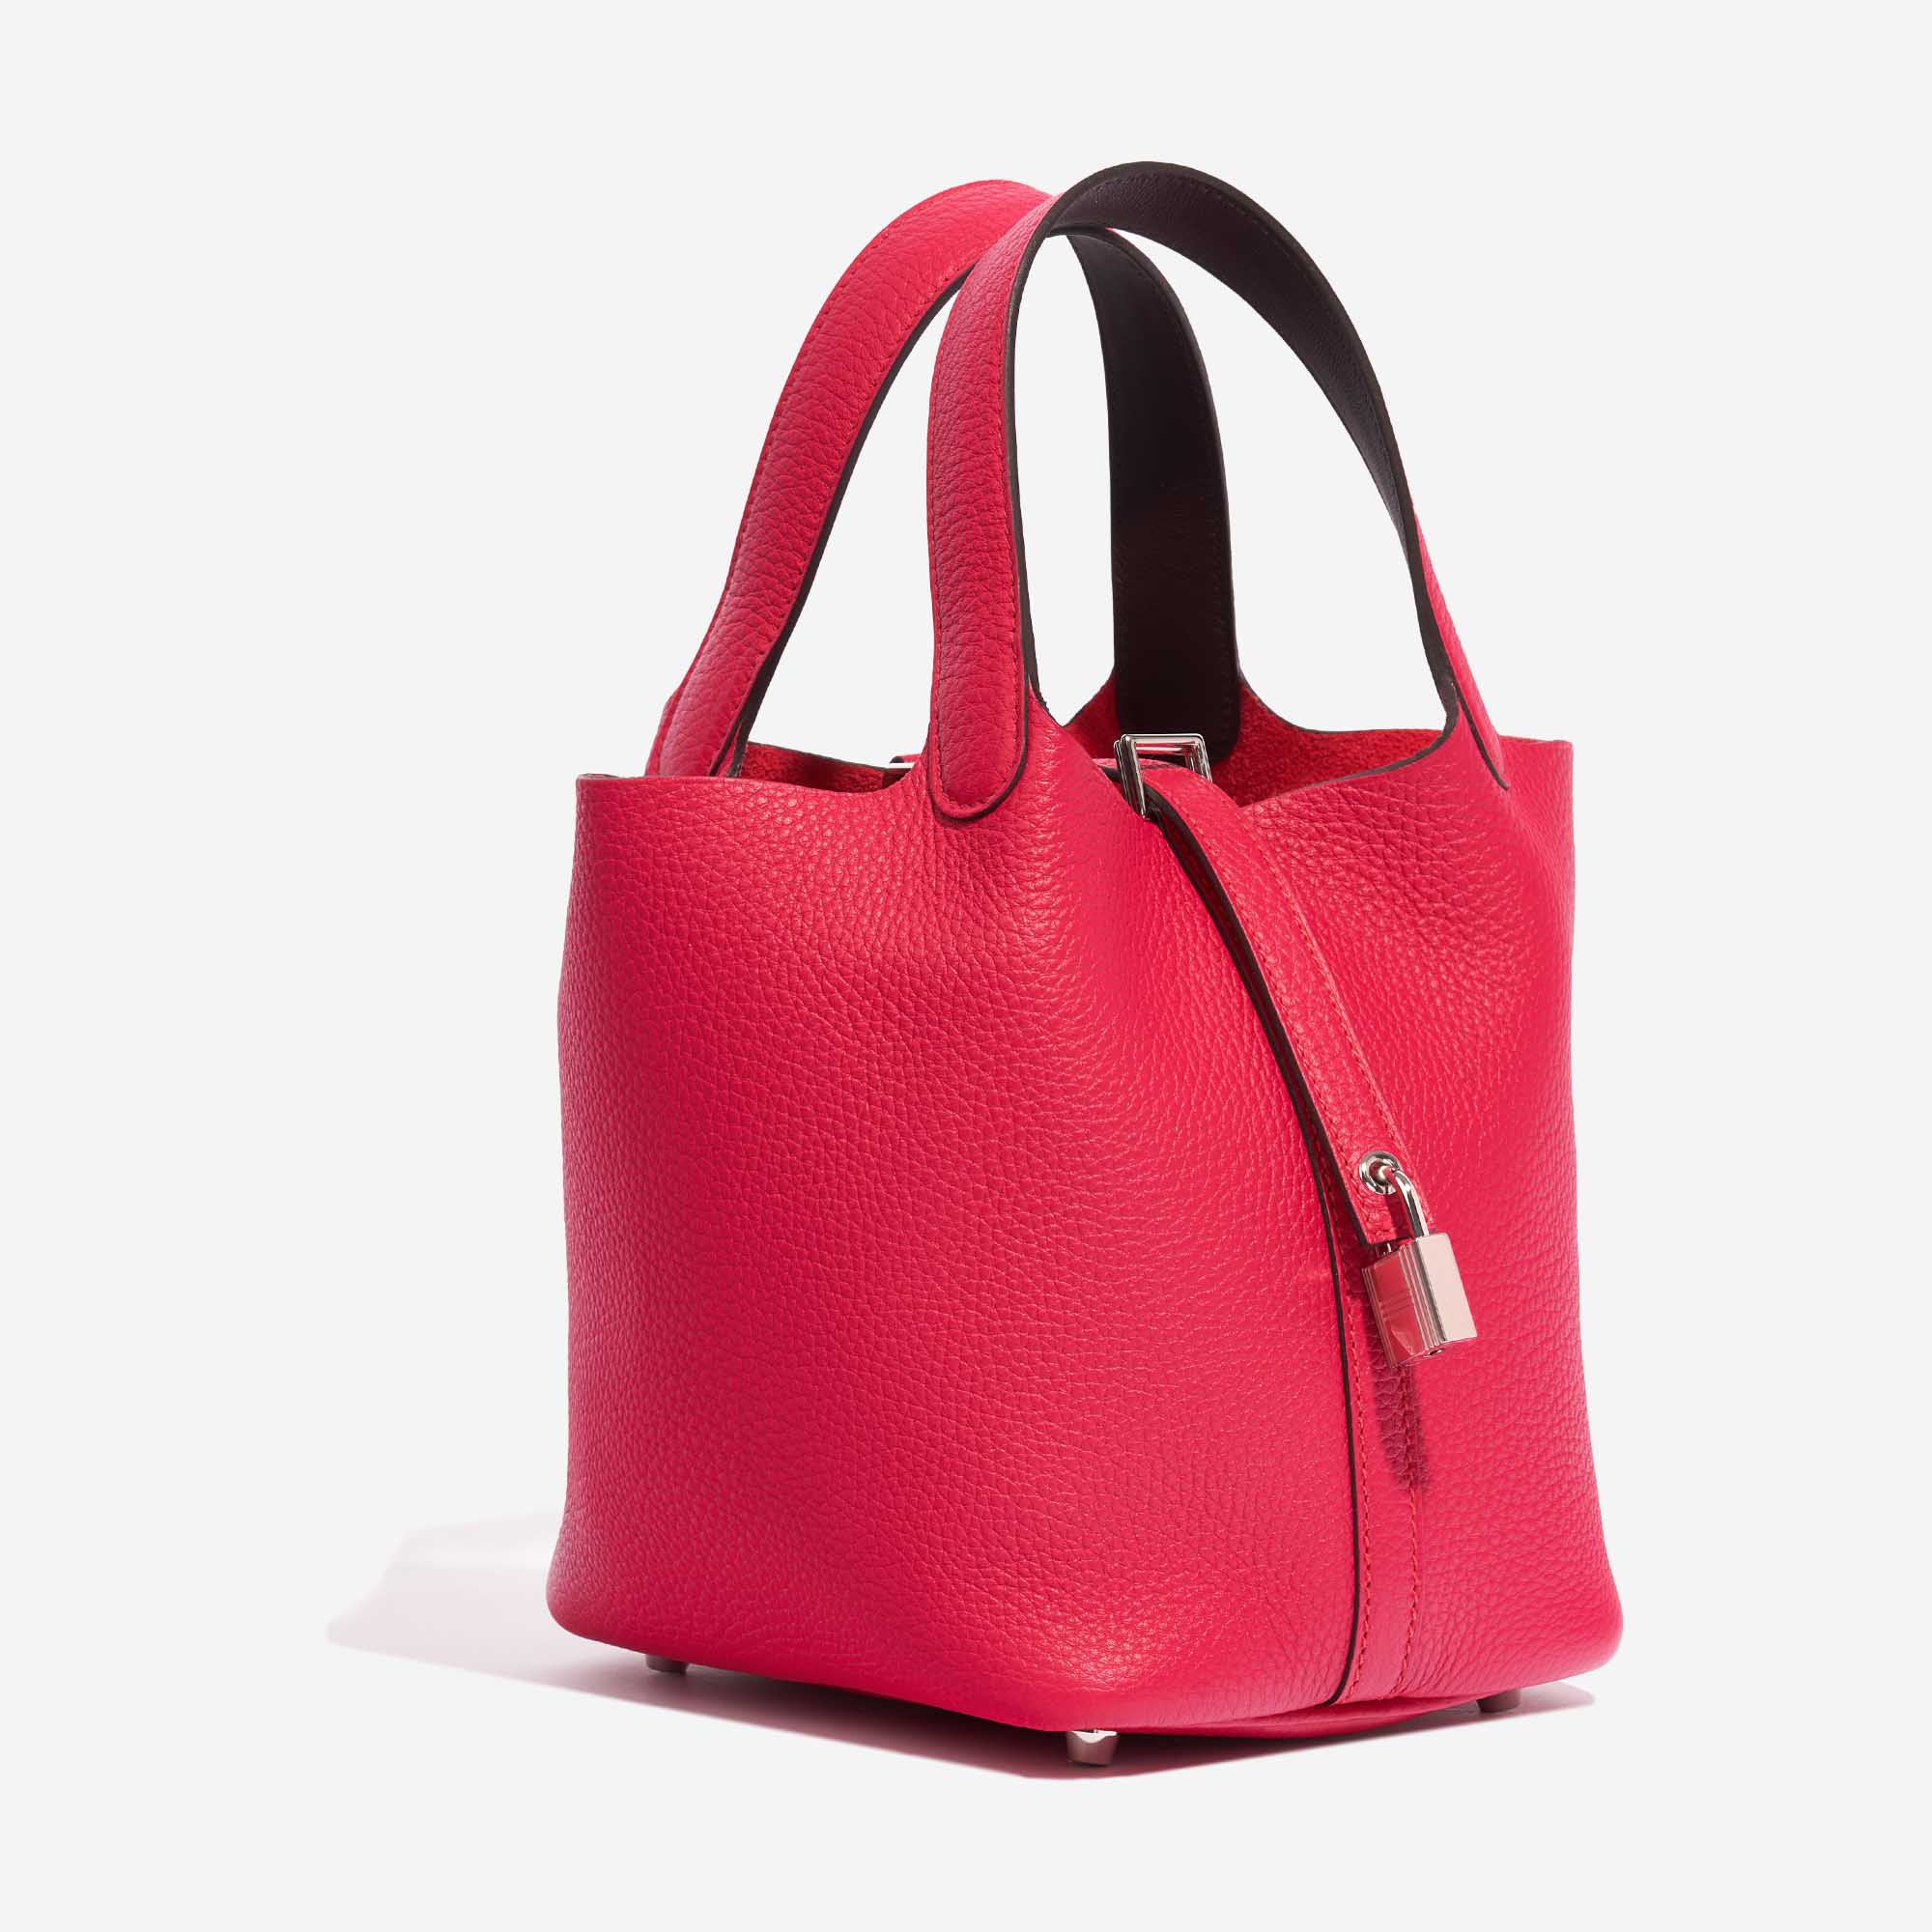 hermes picotin 18cm (stamp z 2021) rouge sellier & framboise, silver  hardware, with dust cover & box